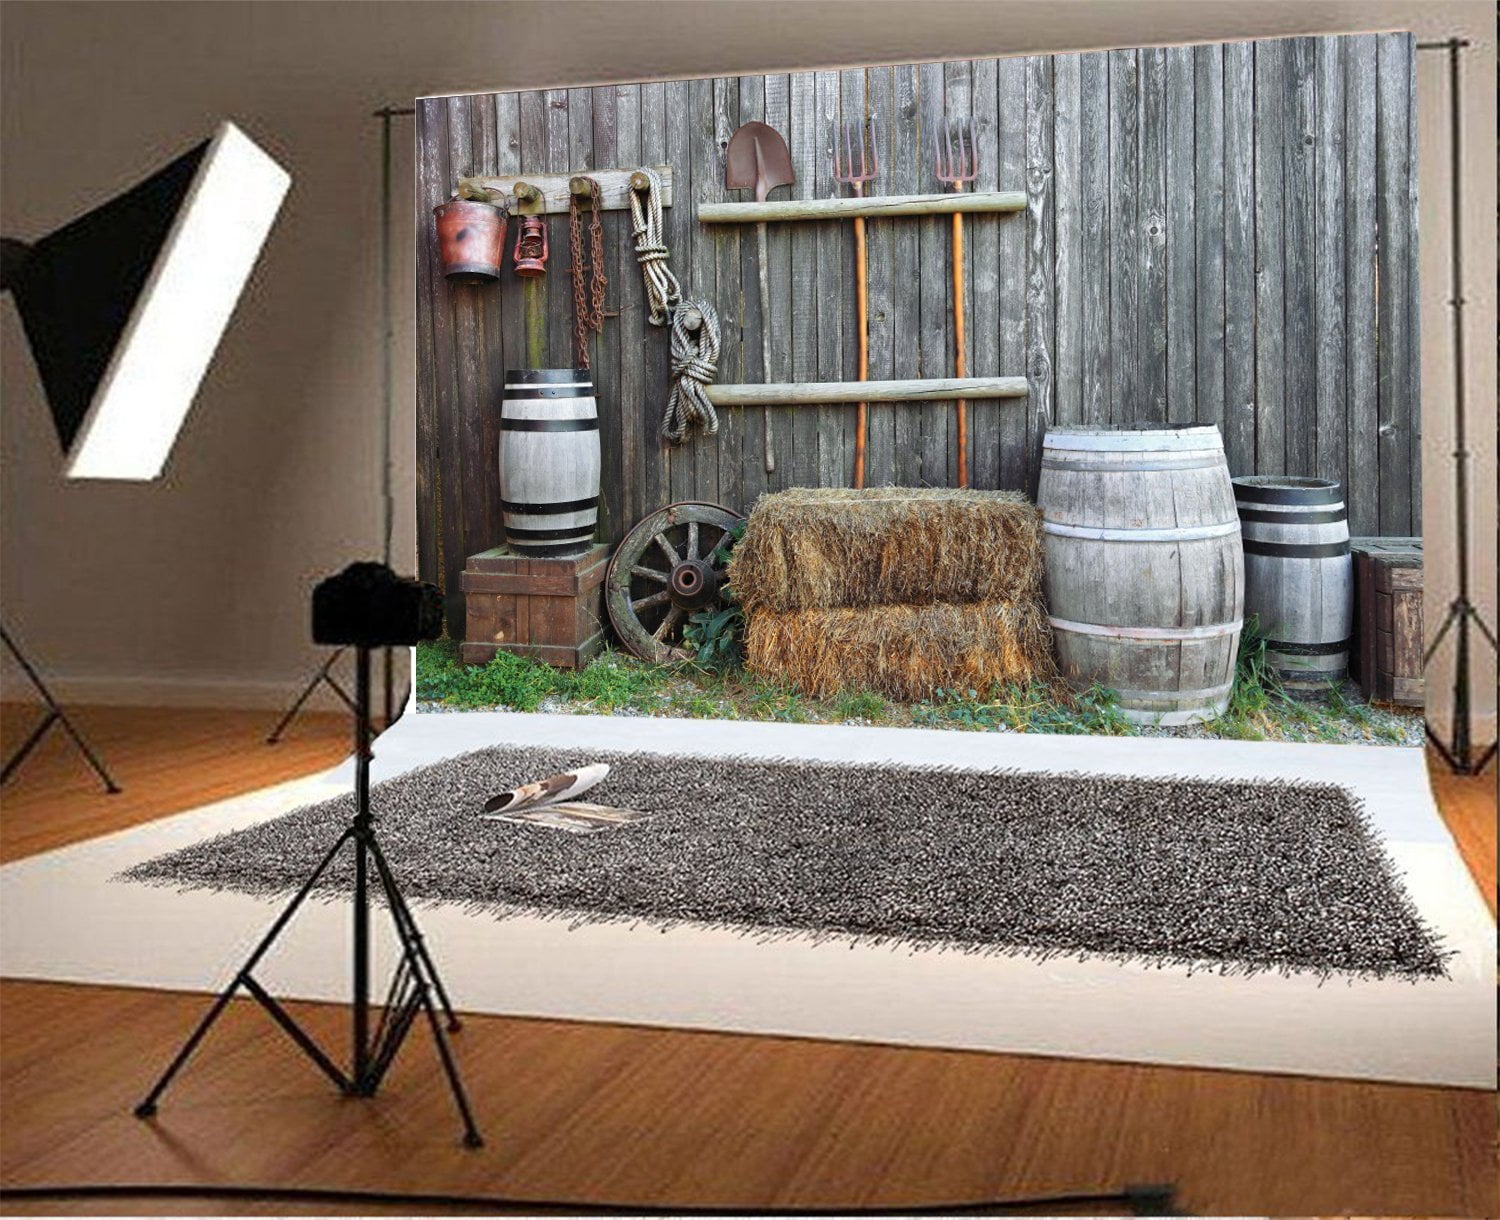 GoEoo 7x5ft Polyester Countryside Farm Party Backdrop Rustic Outdoor Farmland Hay Mow Haystack Autumn Havest Scene Hay Bale in Field Photography Background Cloth Photo Studio Props No Wrinkle 